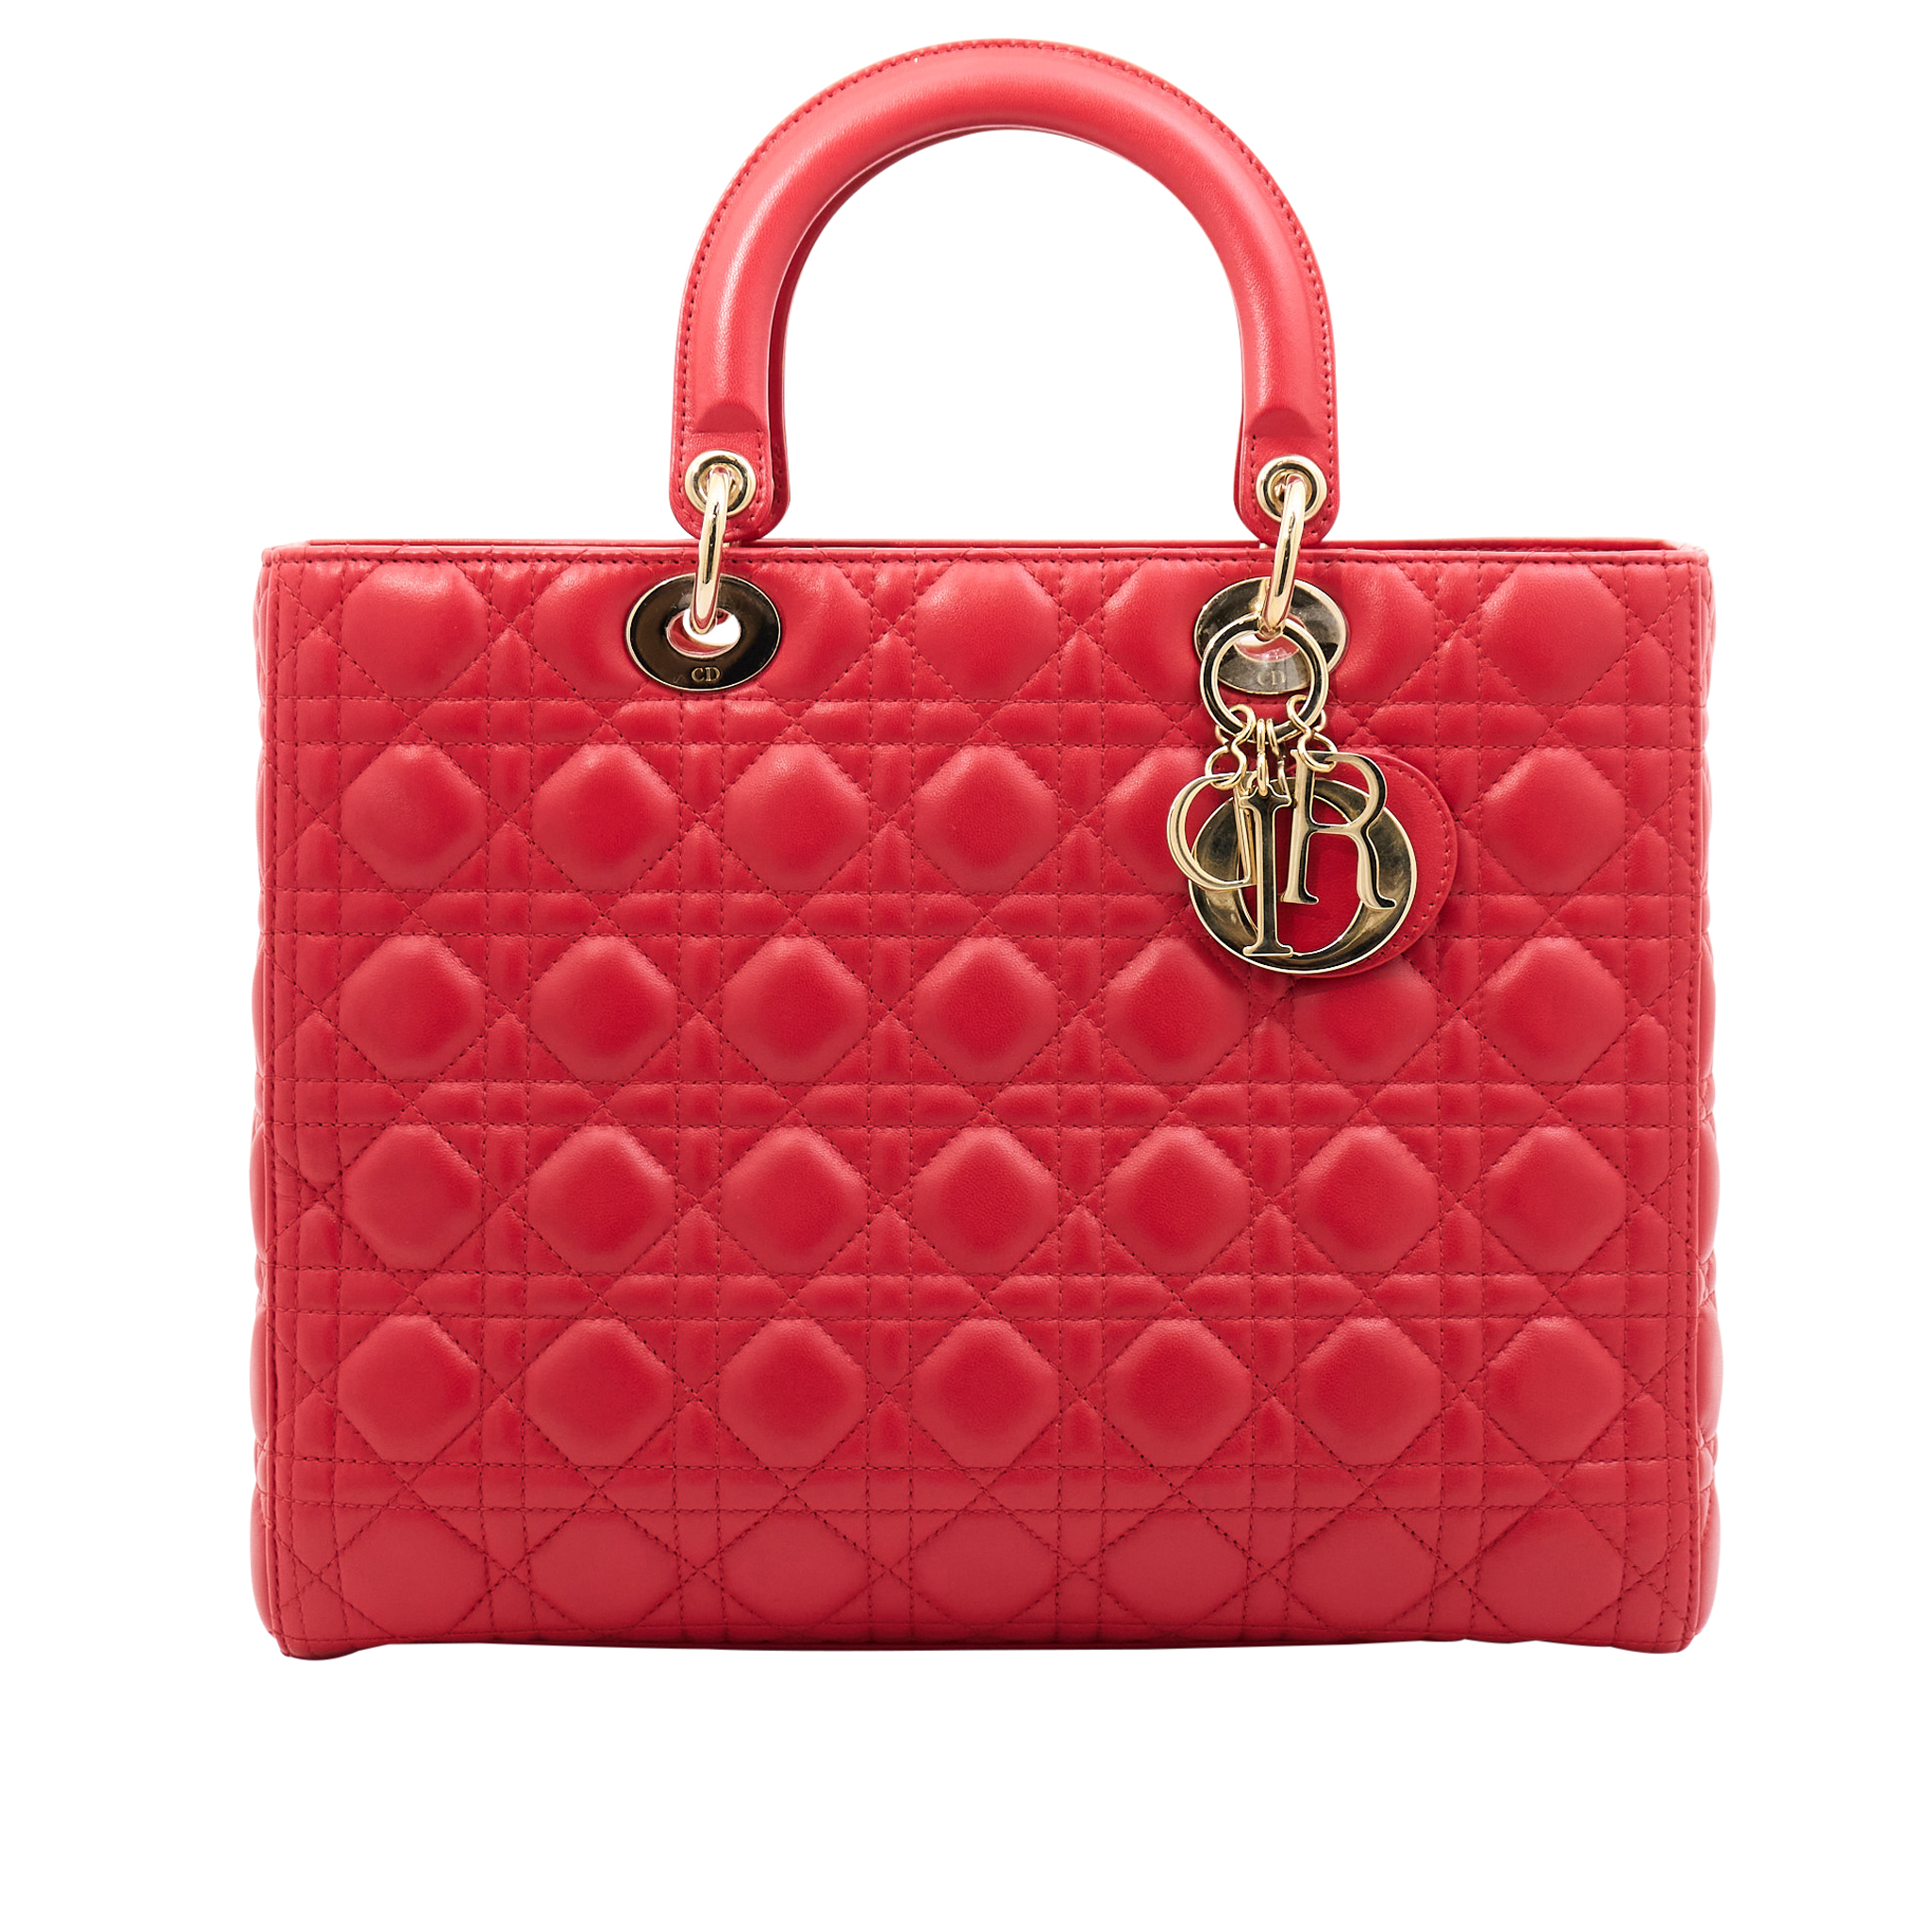 Lady Dior Large Red Bag